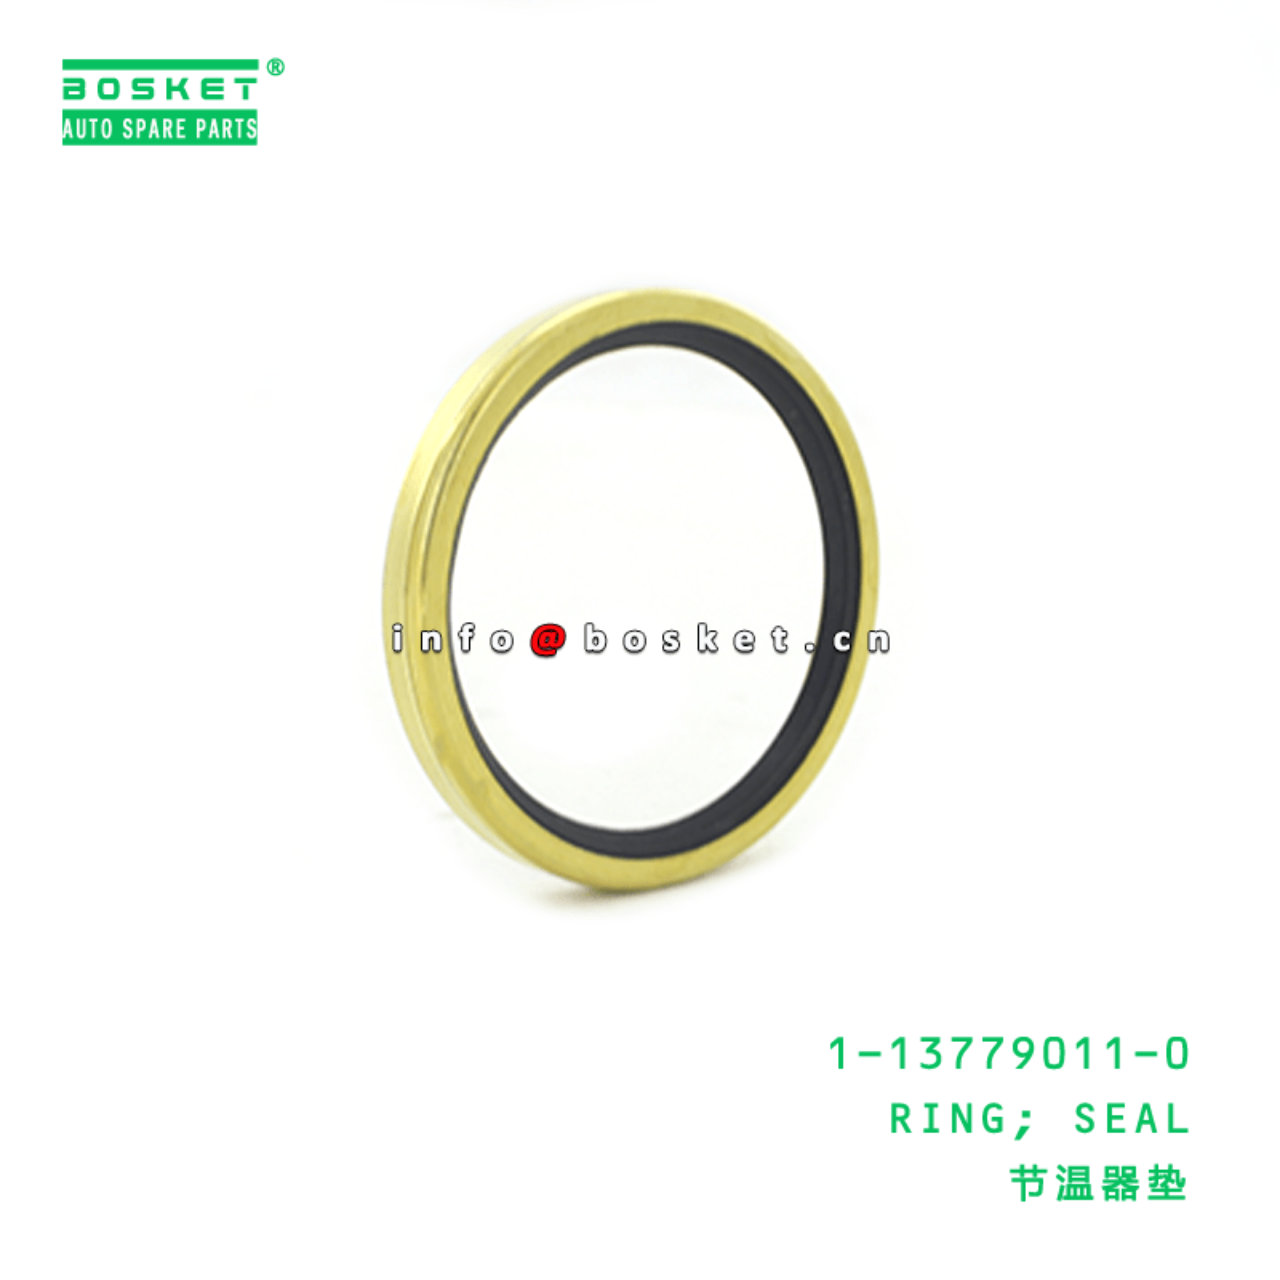  1-13779011-0 Seal Ring 1137790110 Suitable for ISUZU VC46 